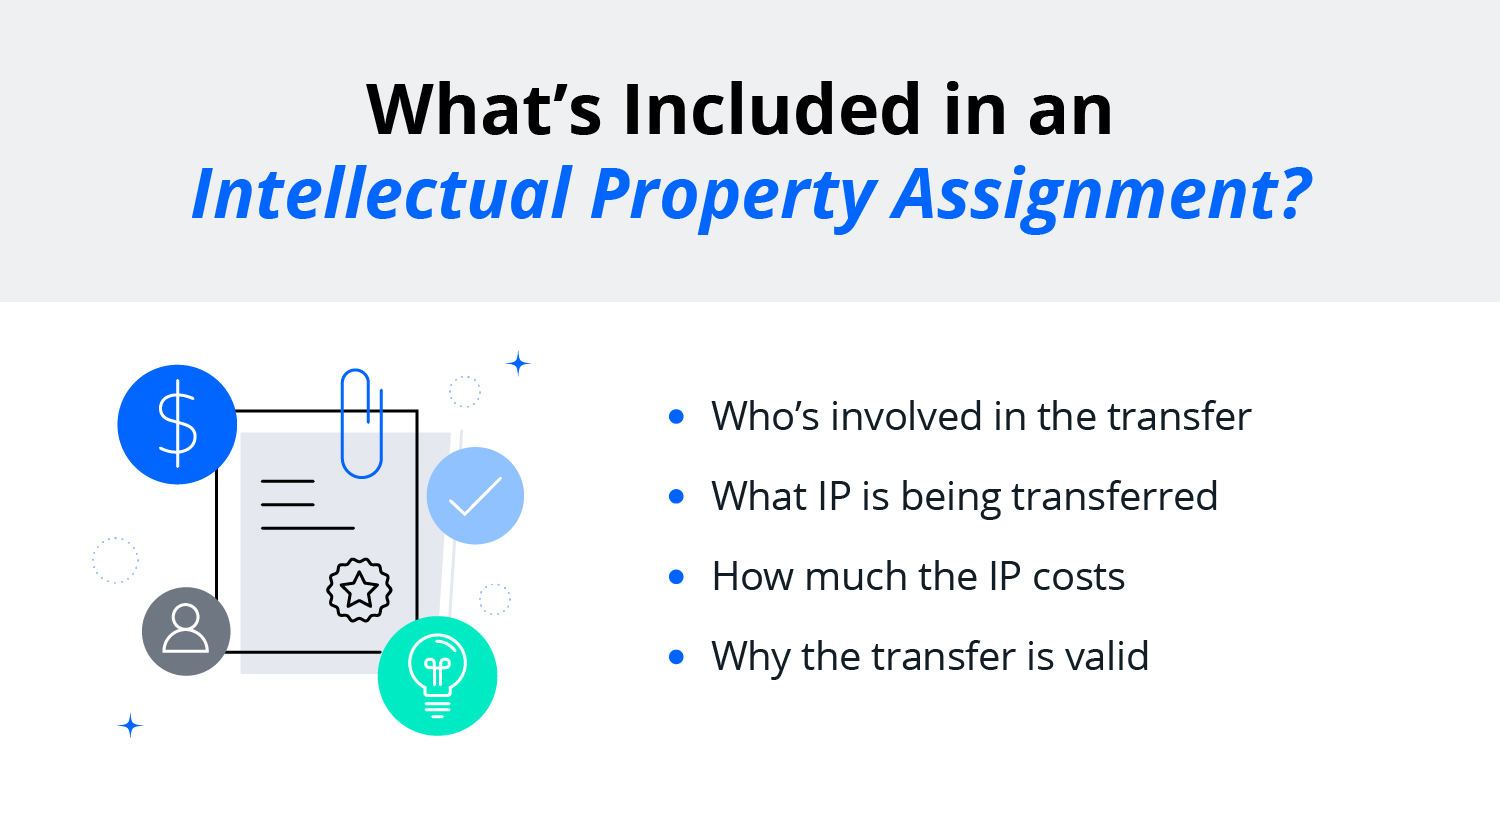 What does an intellectual property assignment include?